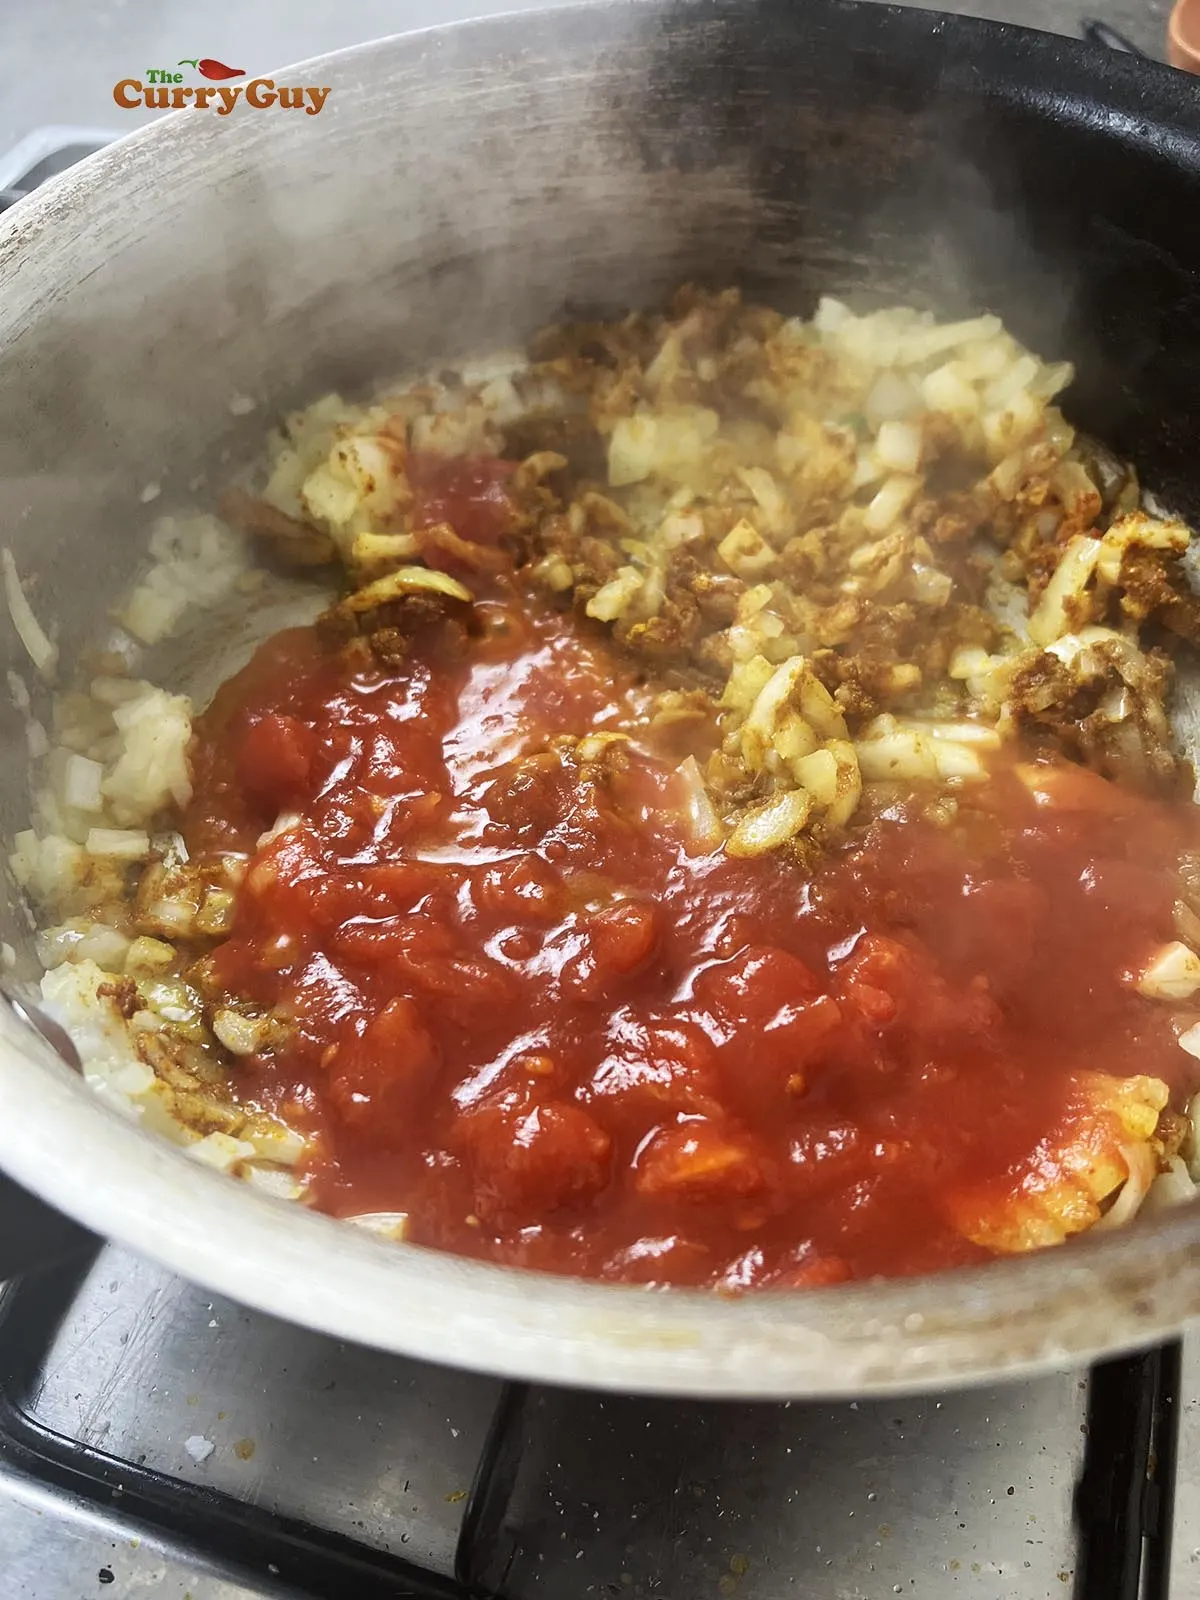 Adding ground spices and chopped tomatoes to the pan